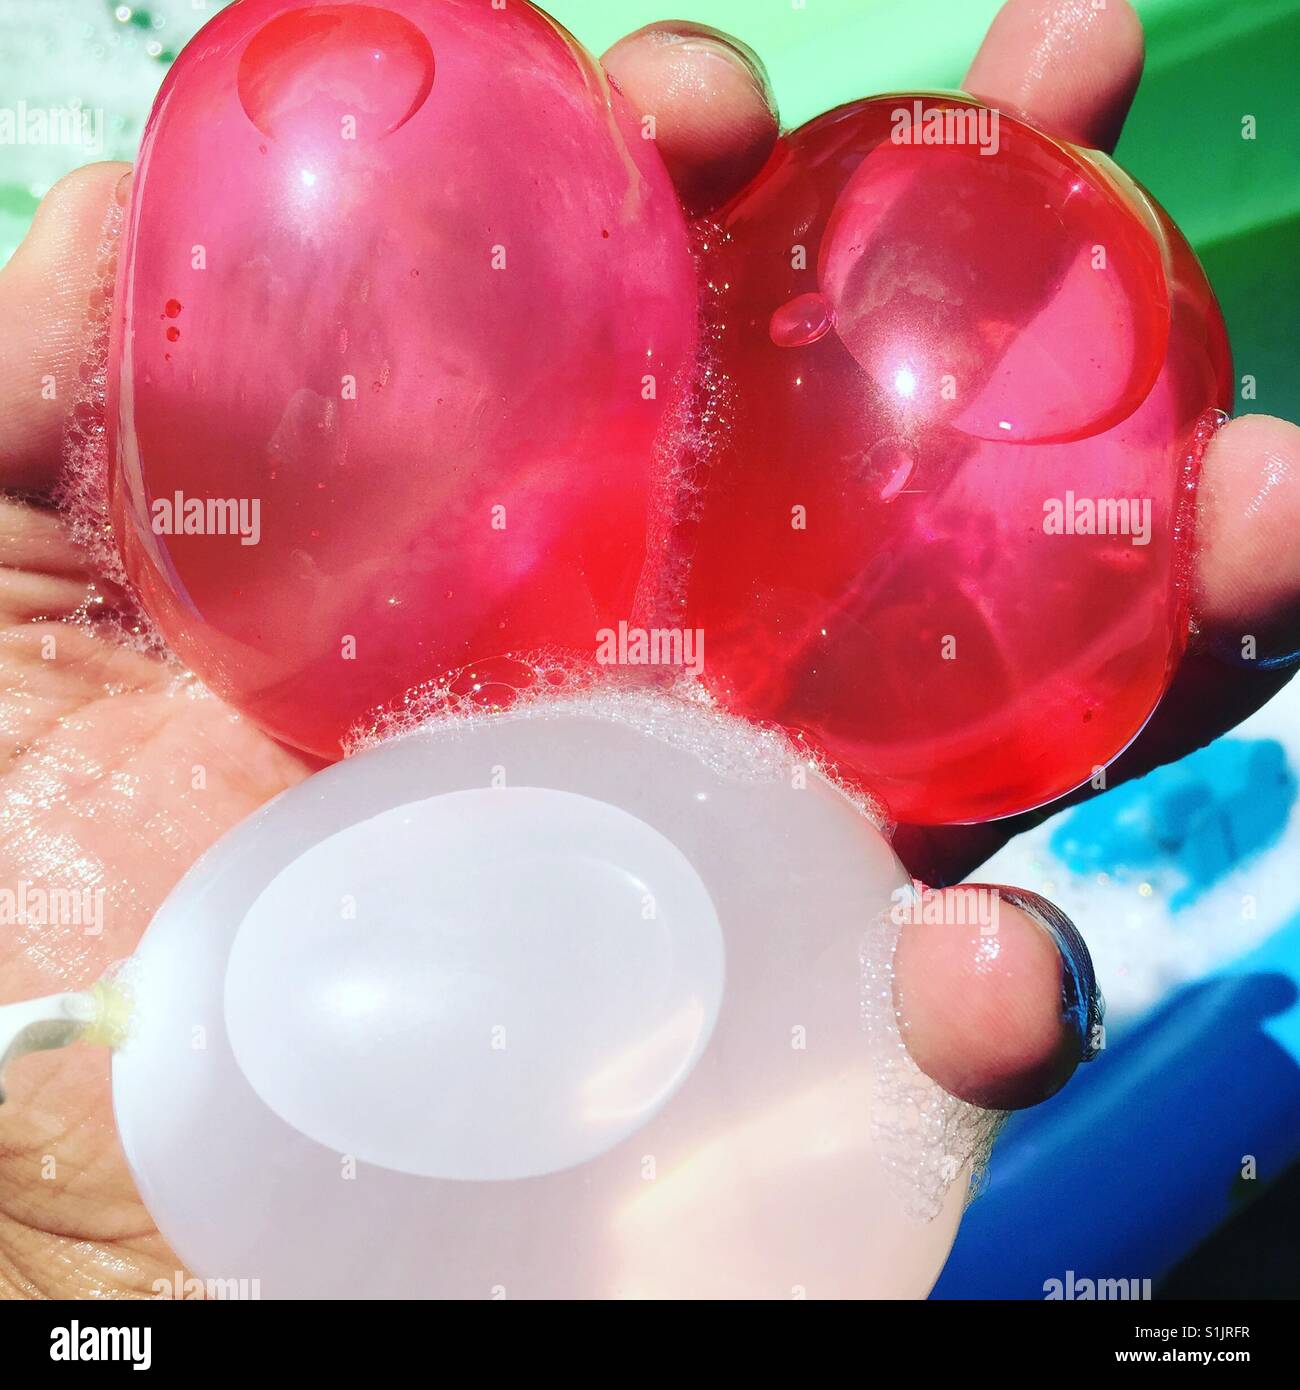 Holding some red and white balloons by K.R. Stock Photo